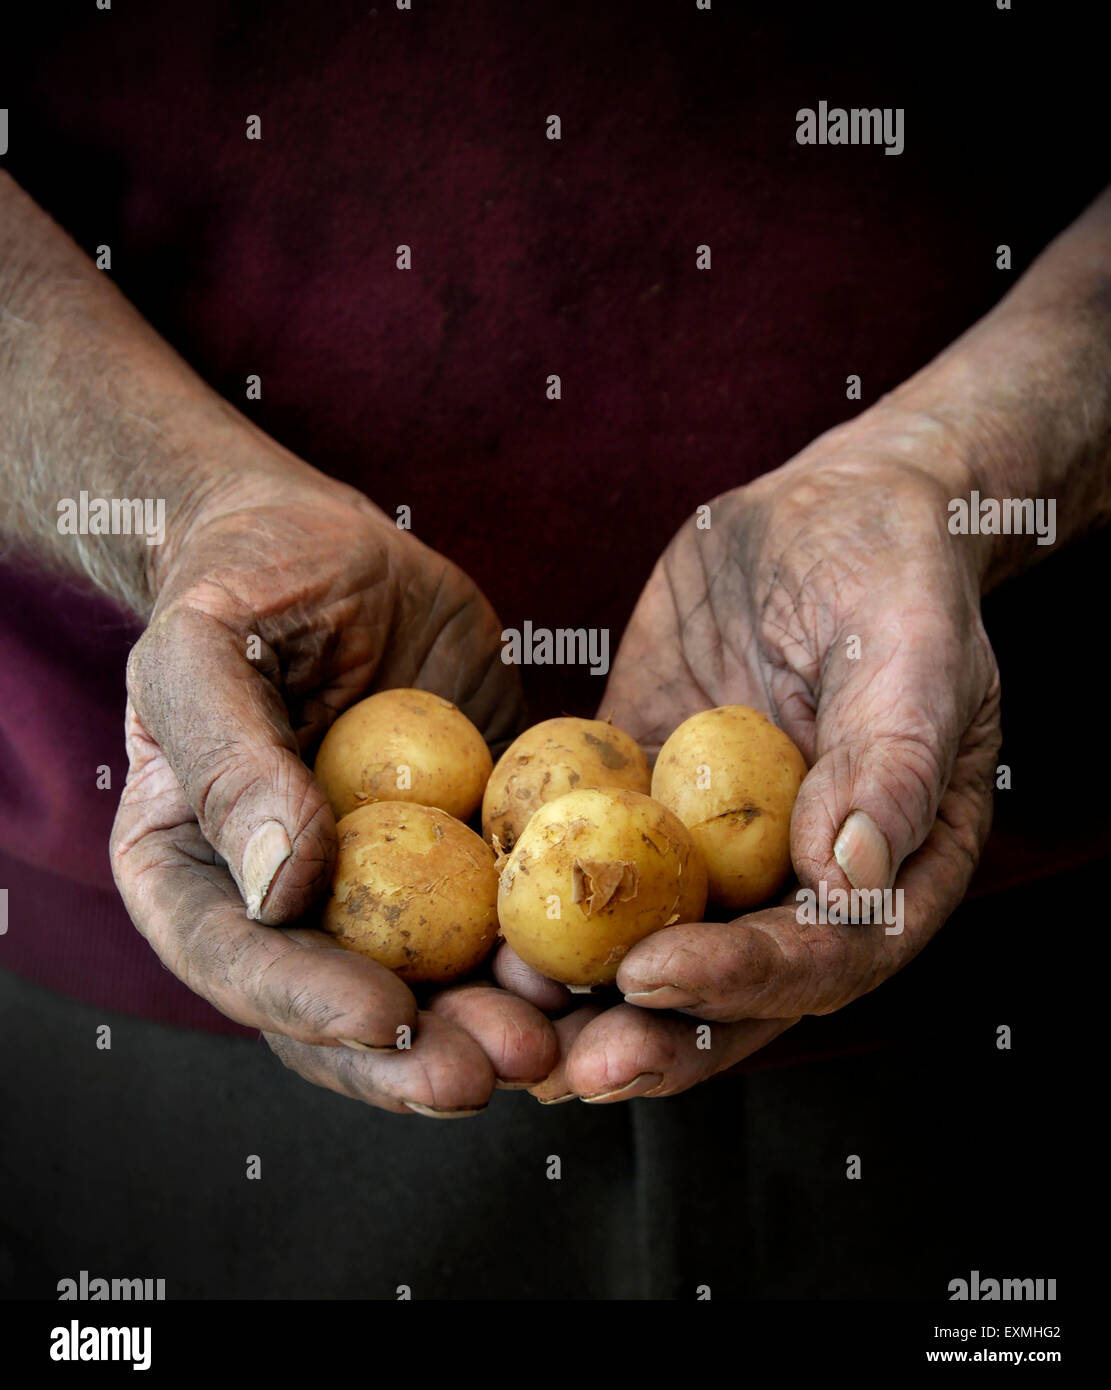 A farmer or gardener cradling a pile of new potatoes Stock Photo